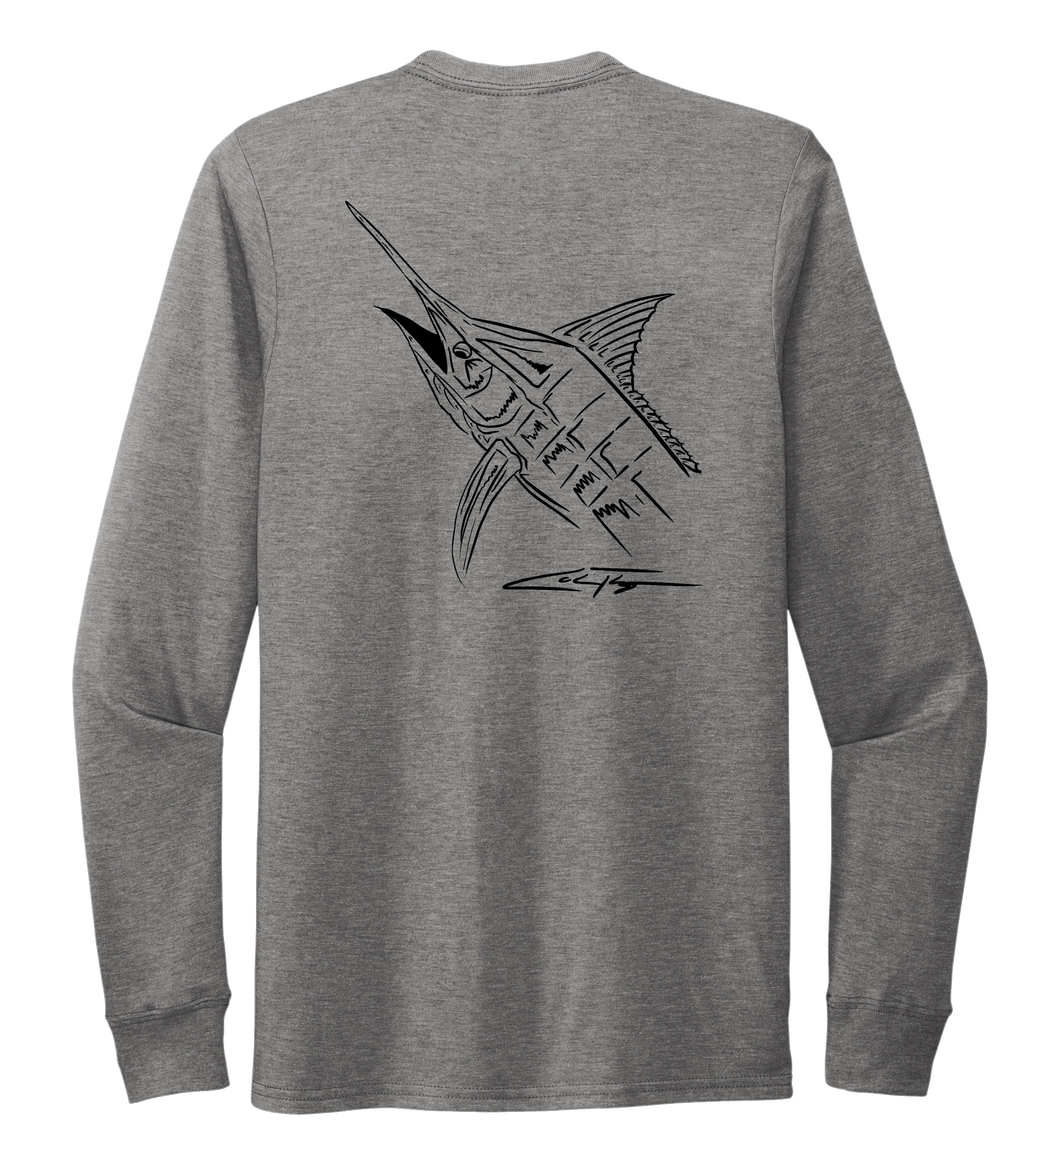 Colin Thompson, Marlin, Crew Neck Long Sleeve T-Shirt in Oyster Grey